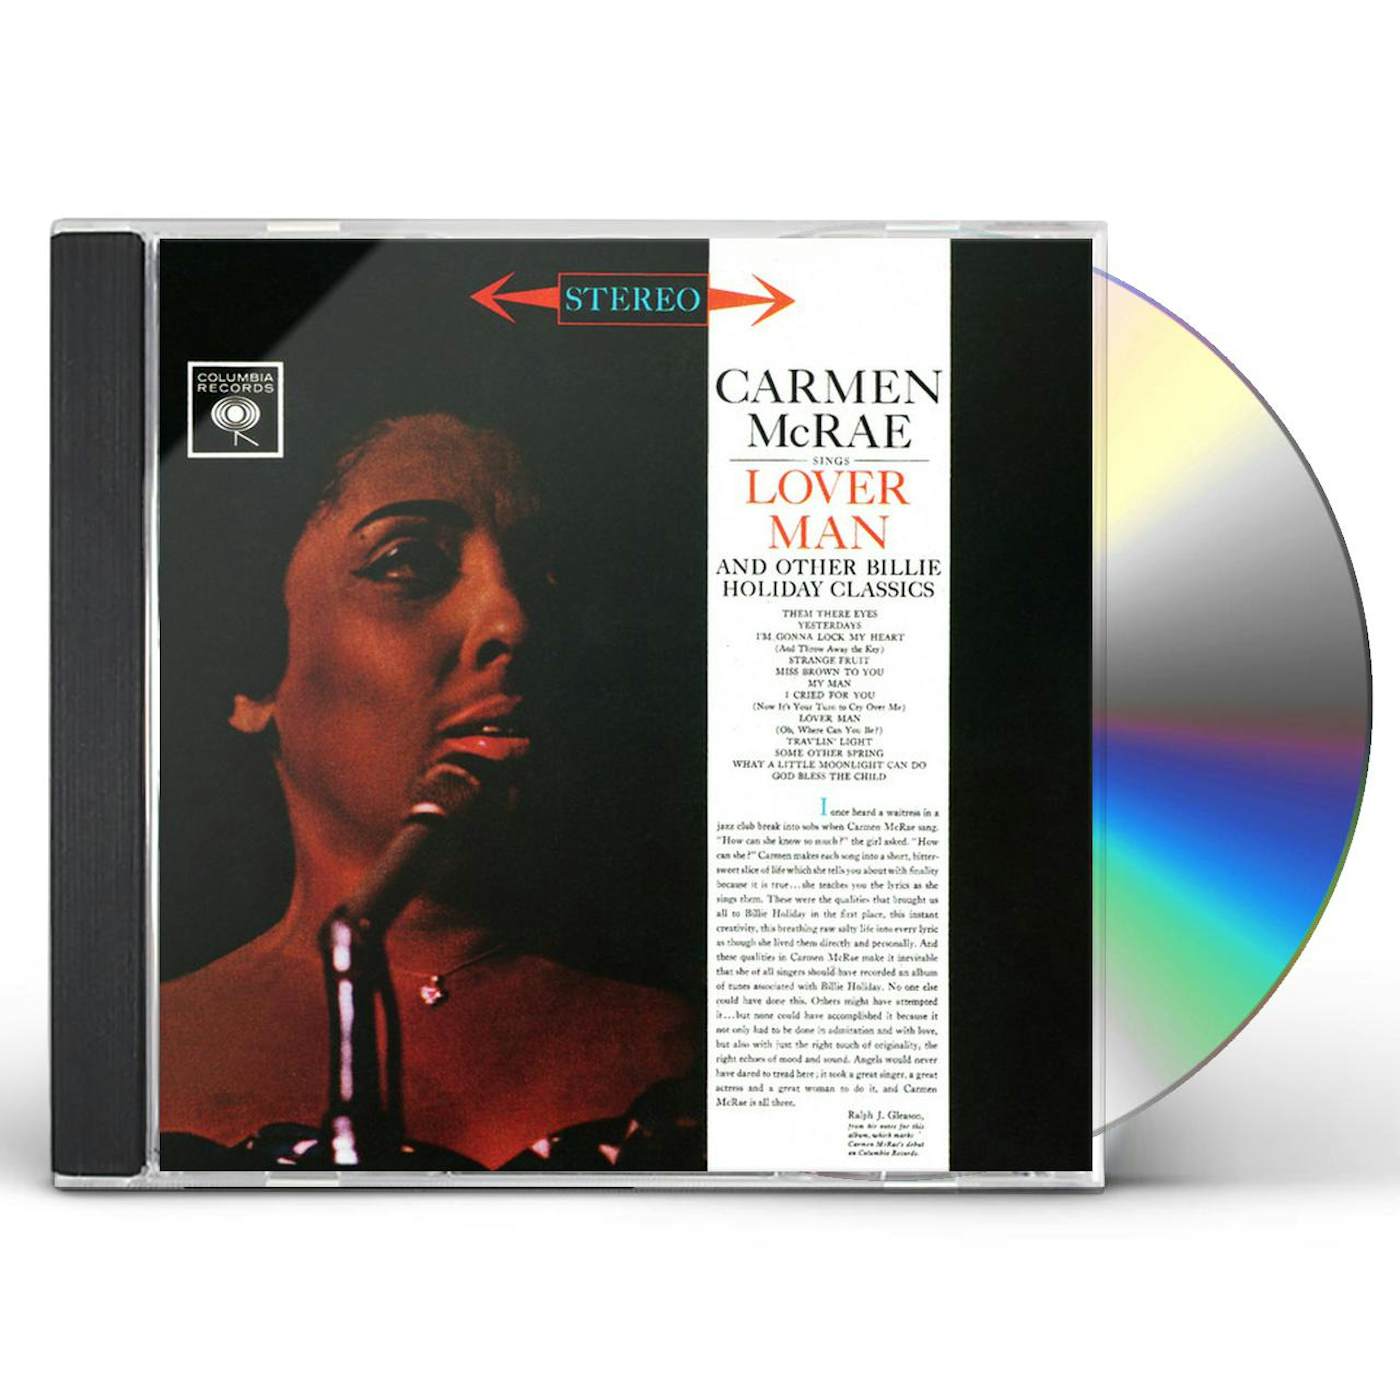 Carmen McRae SINGS LOVER MAN & OTHER BILLIE HOLIDAY CLASSICS CD